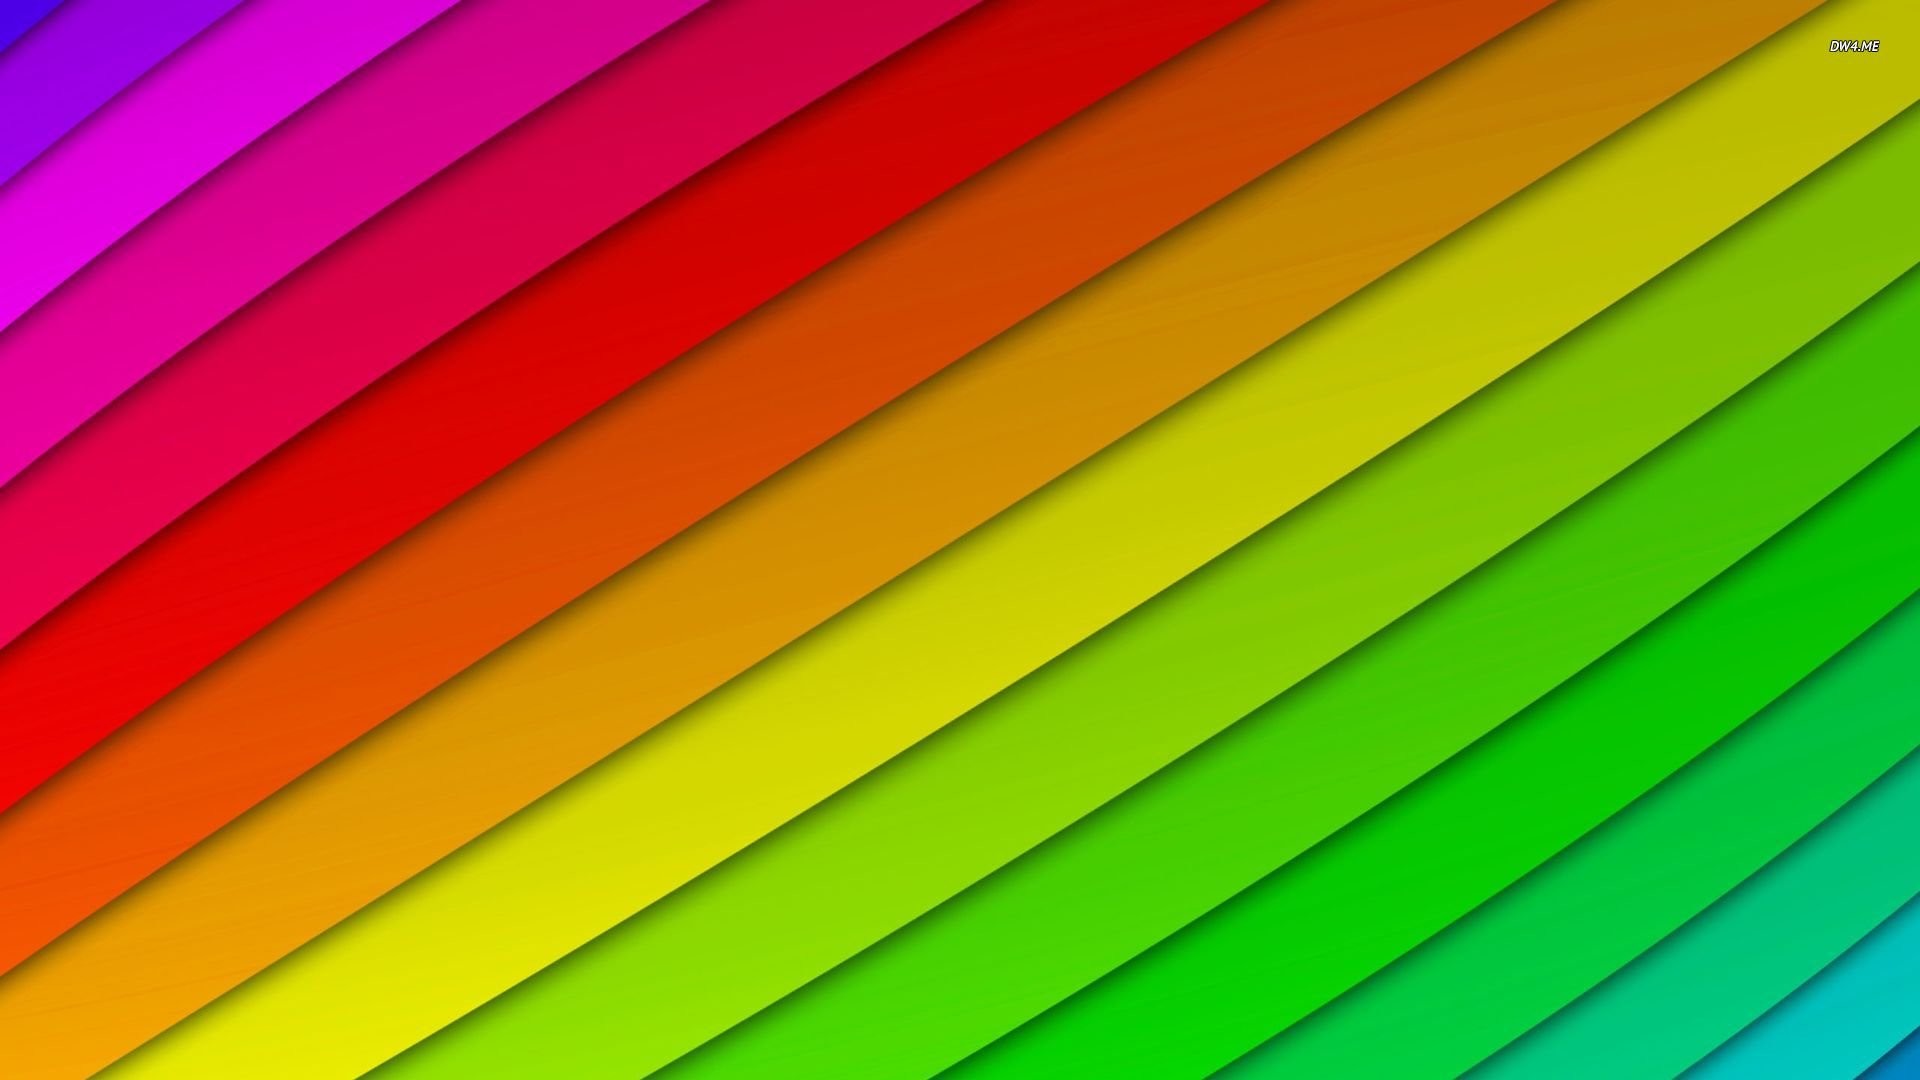 1920x1080 Colored Curved Lines 343047 ...